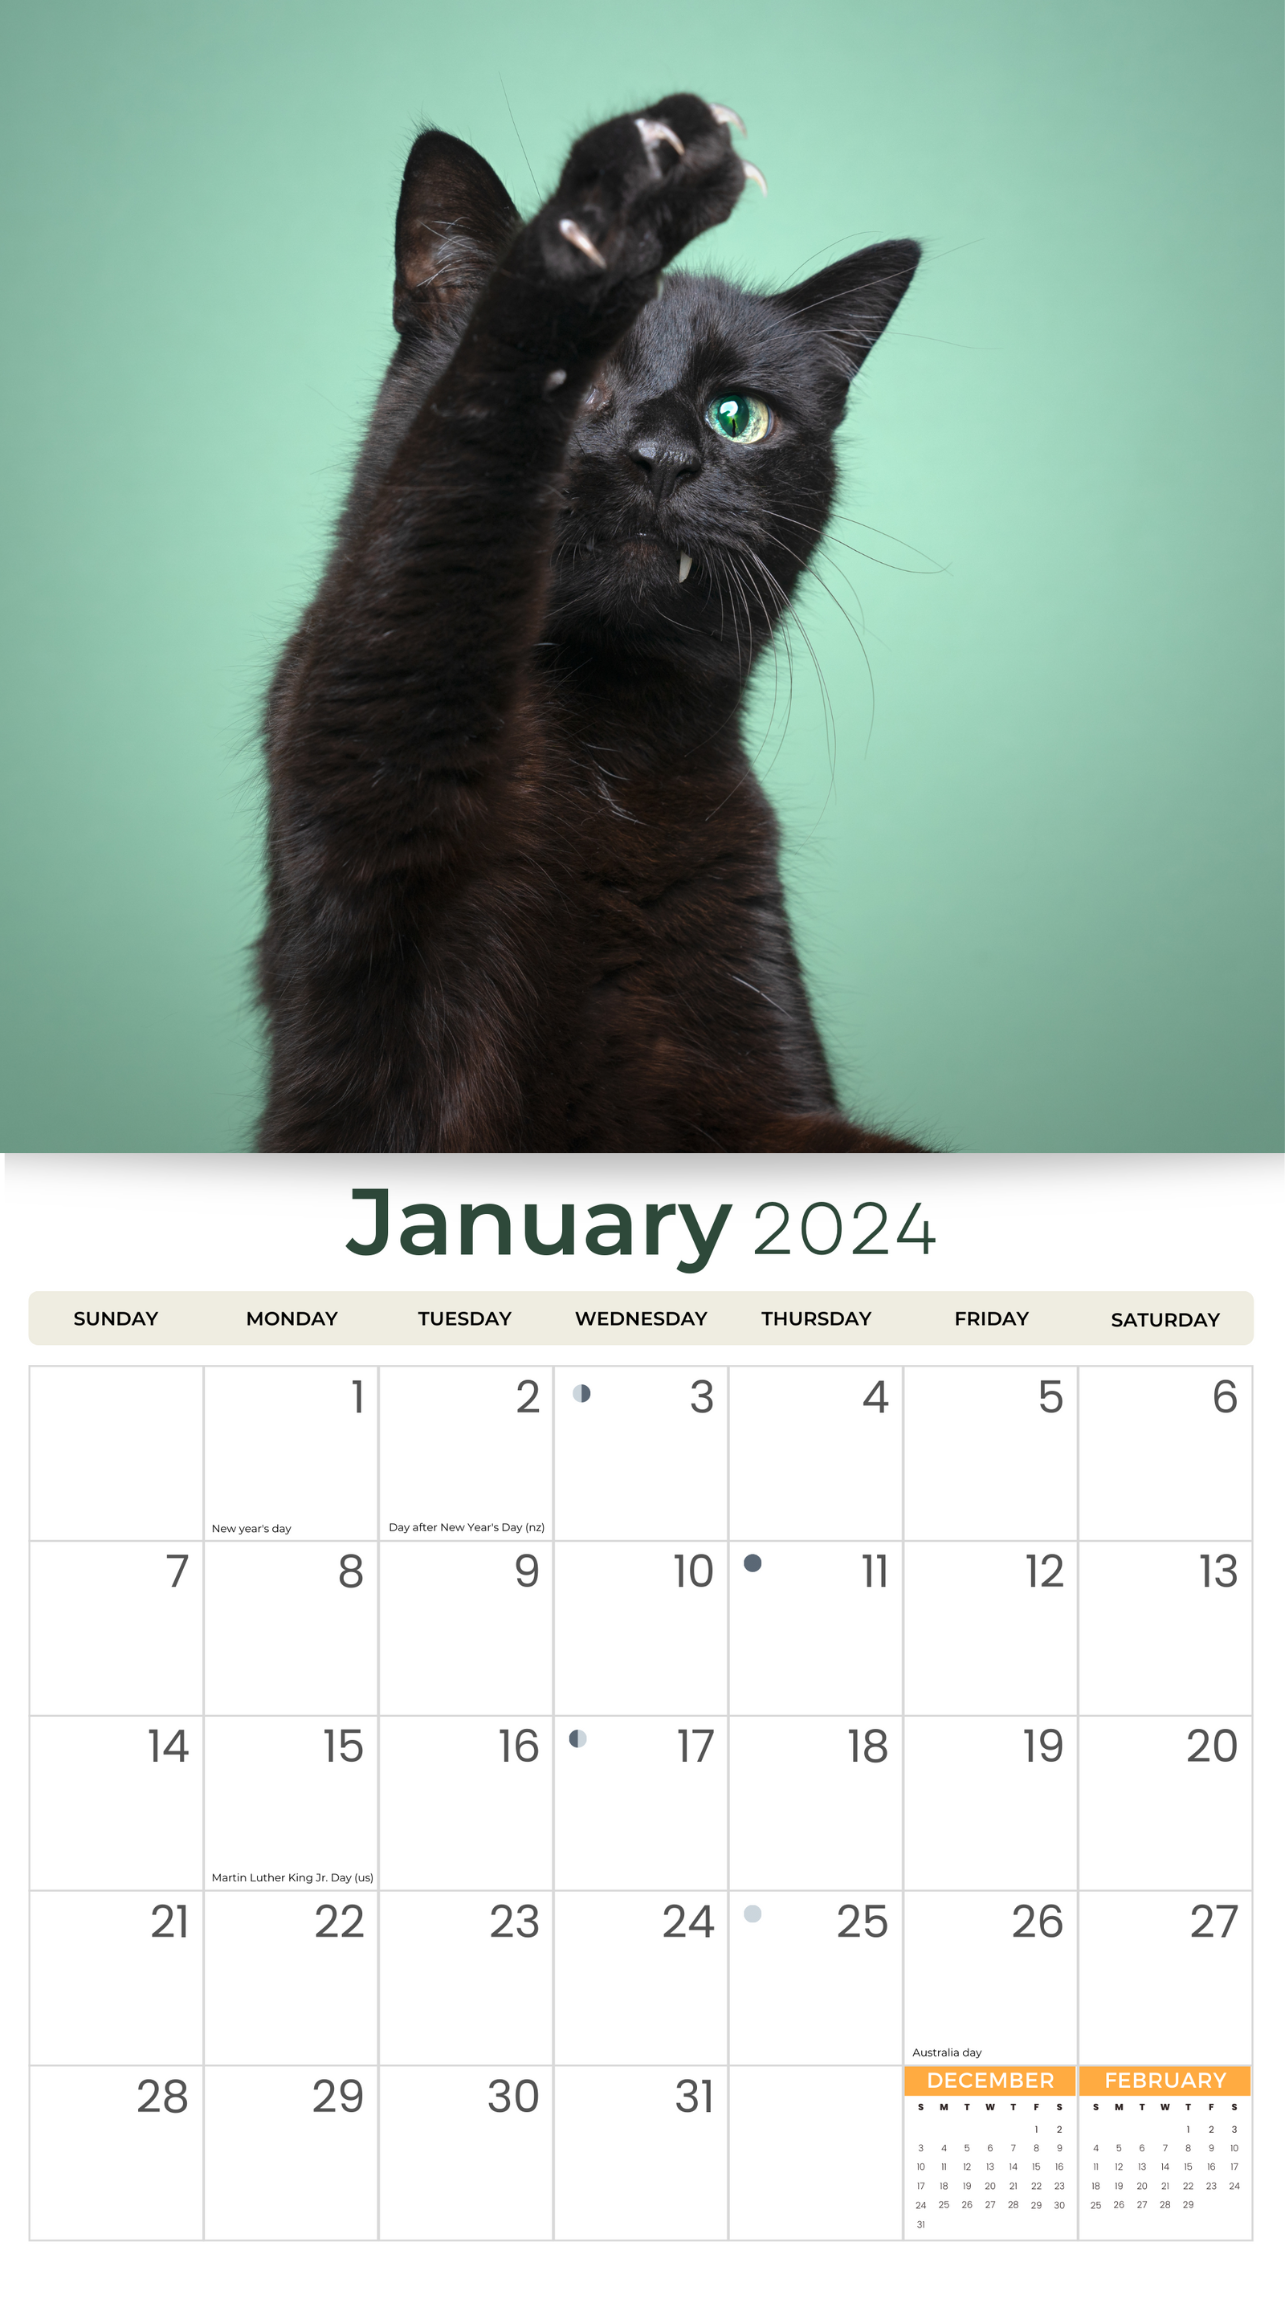 2024 Black Cats & Kittens - Deluxe Wall Calendar by Just Calendars - 16 Month - Plastic Free